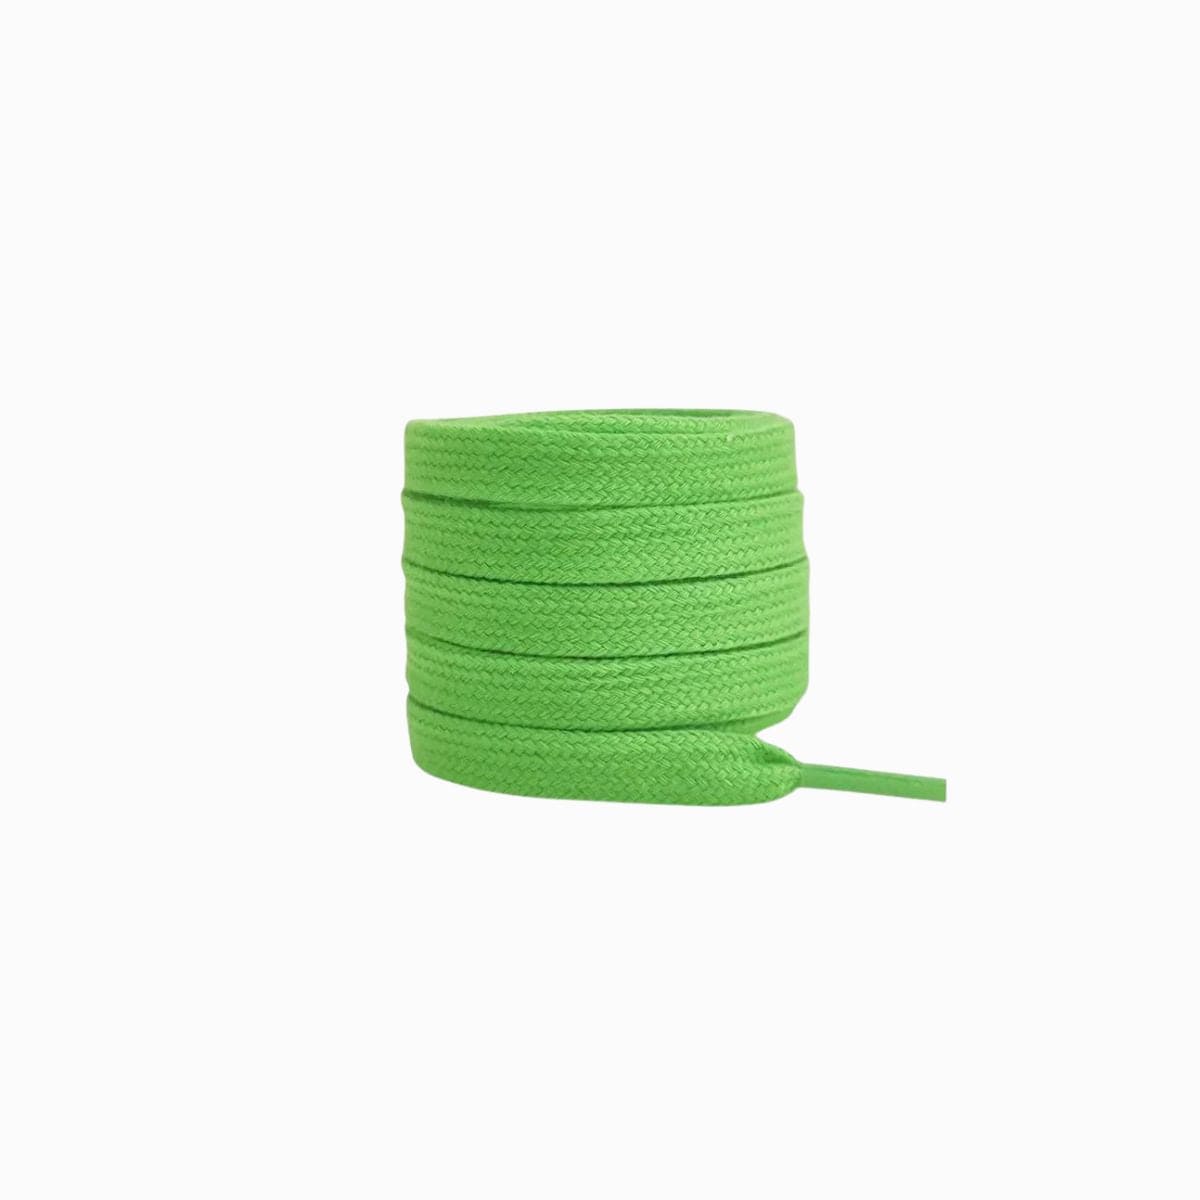 Green Replacement Adidas Shoe Laces for Adidas Samba OG Sneakers by Kicks Shoelaces